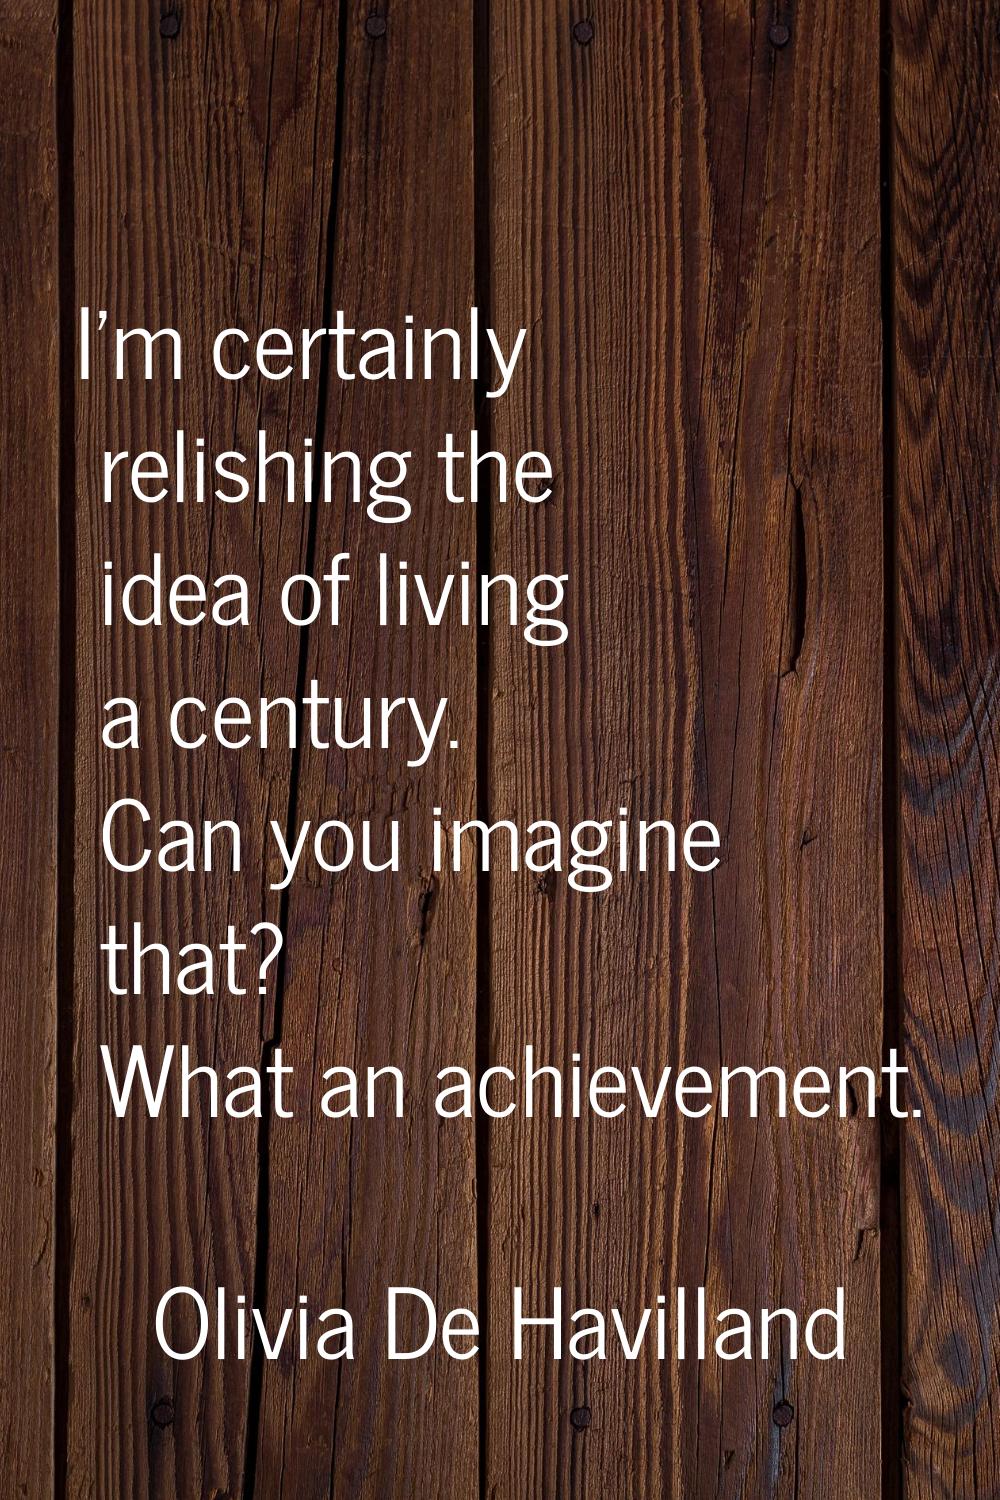 I'm certainly relishing the idea of living a century. Can you imagine that? What an achievement.